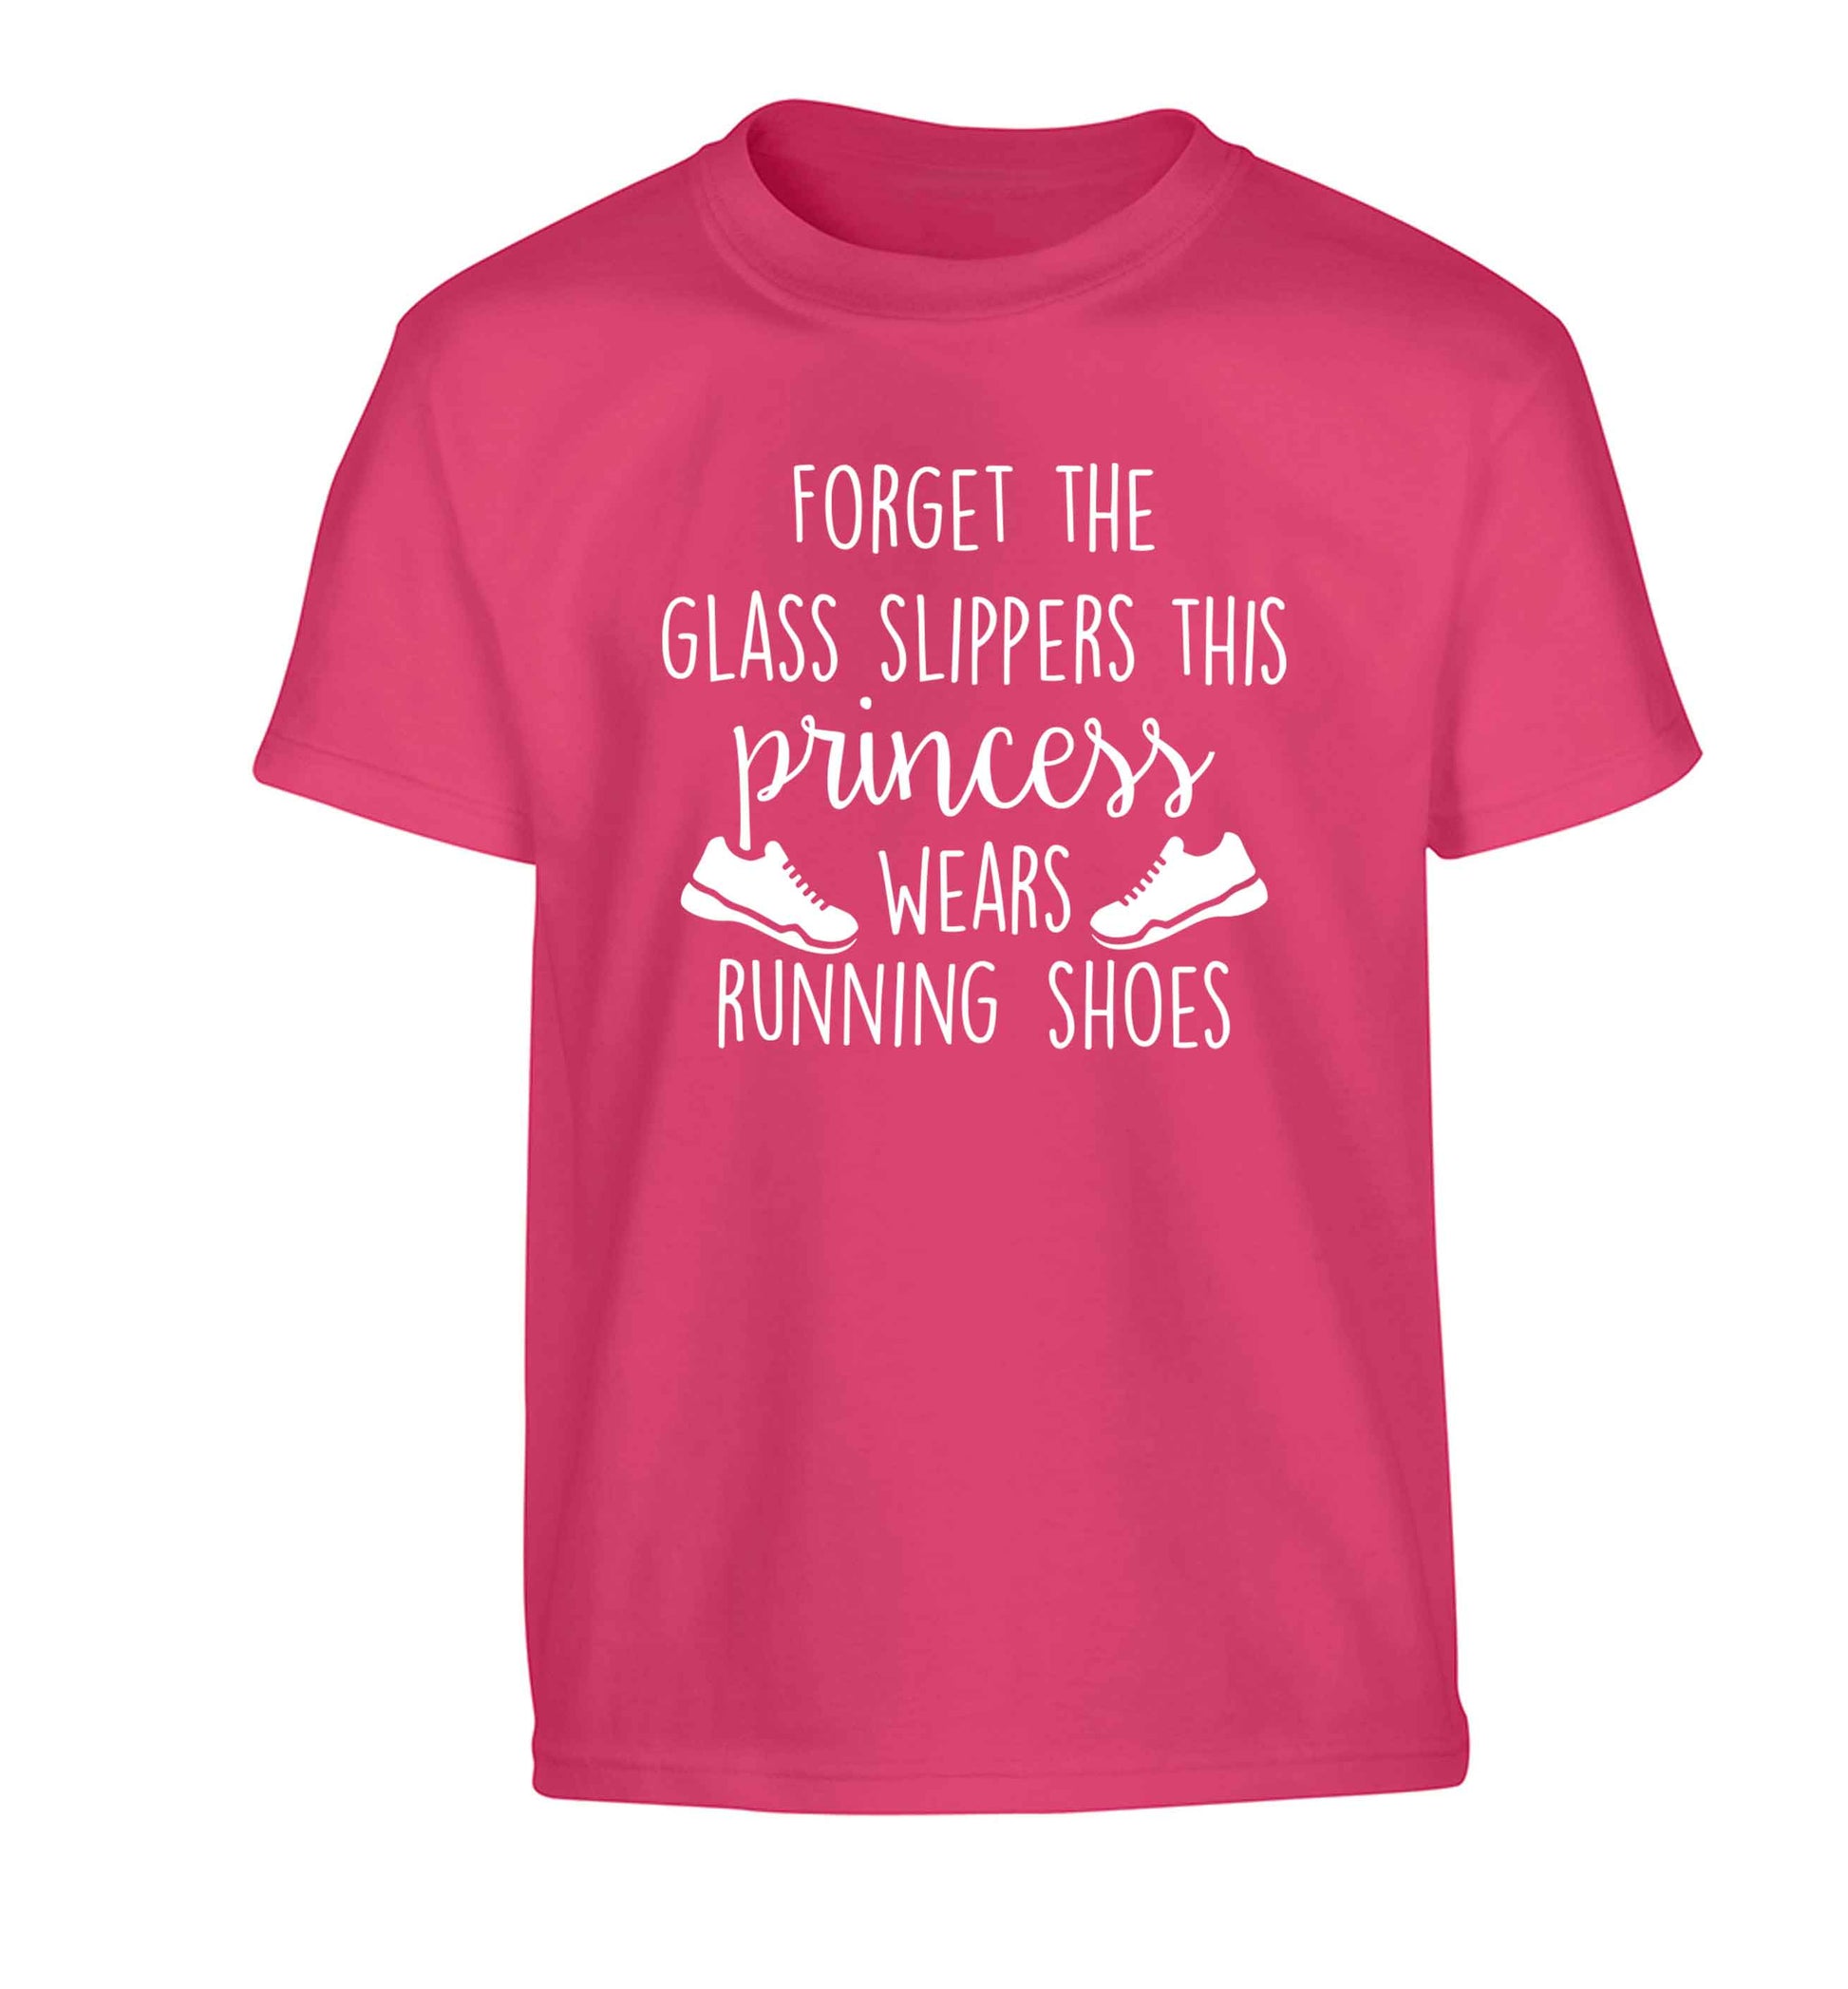 Forget the glass slippers this princess wears running shoes Children's pink Tshirt 12-13 Years